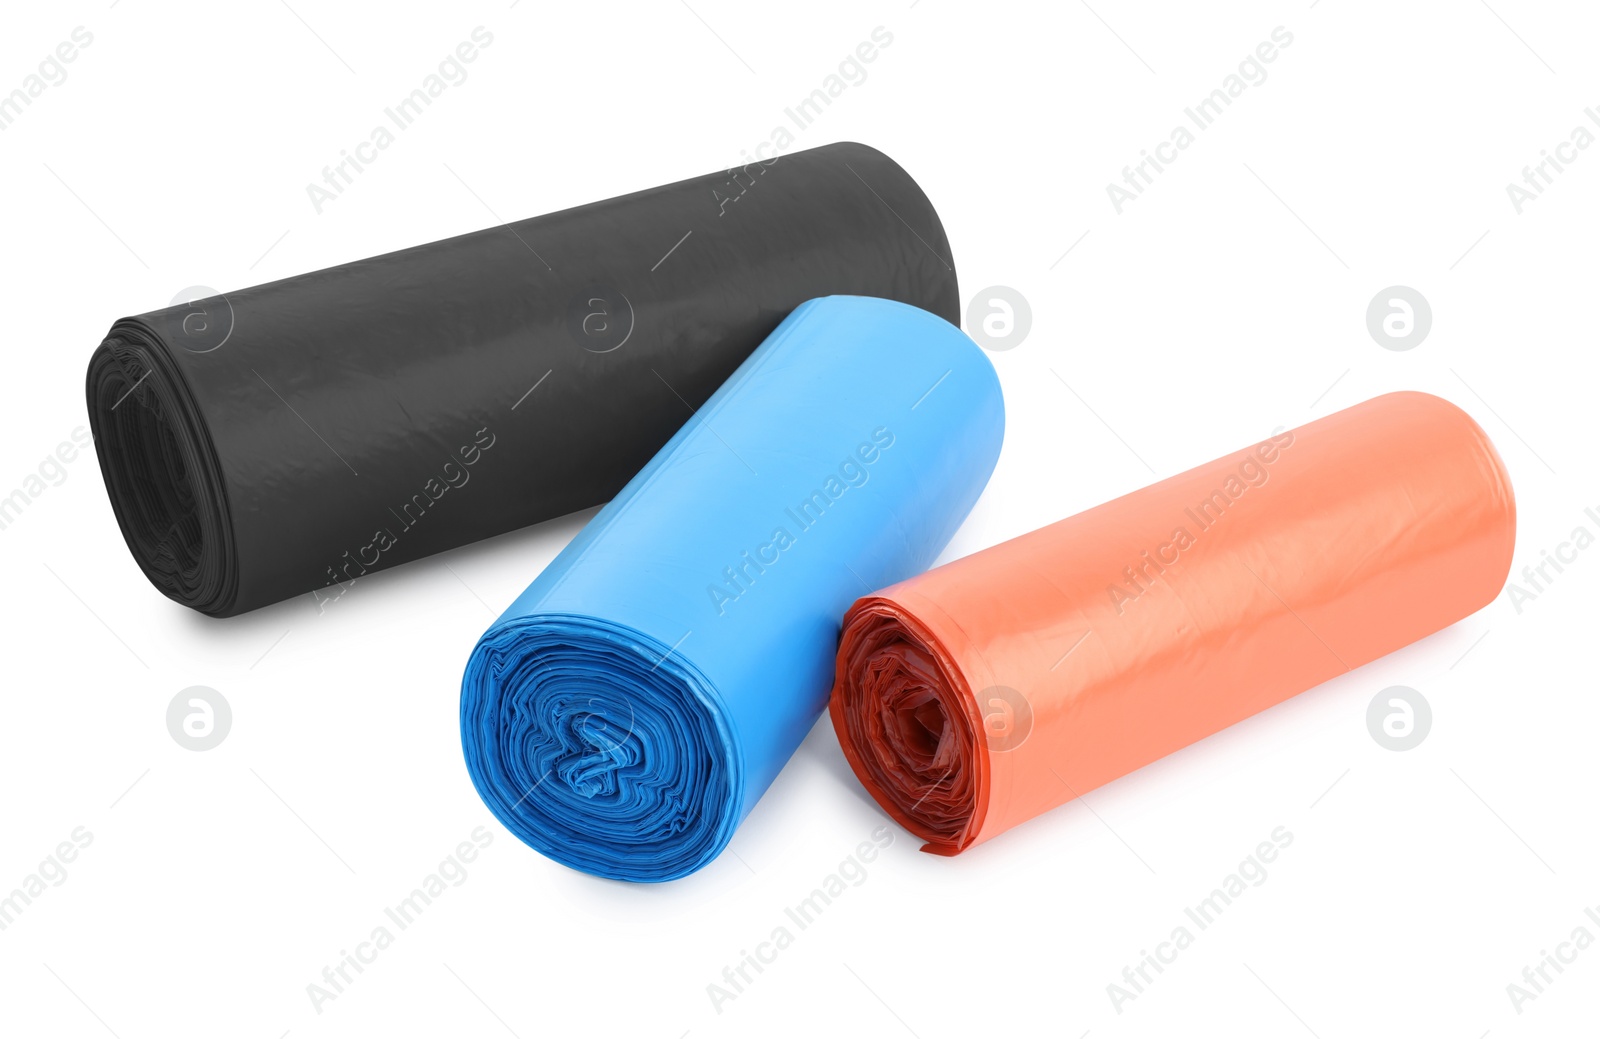 Photo of Rolls of different color garbage bags isolated on white